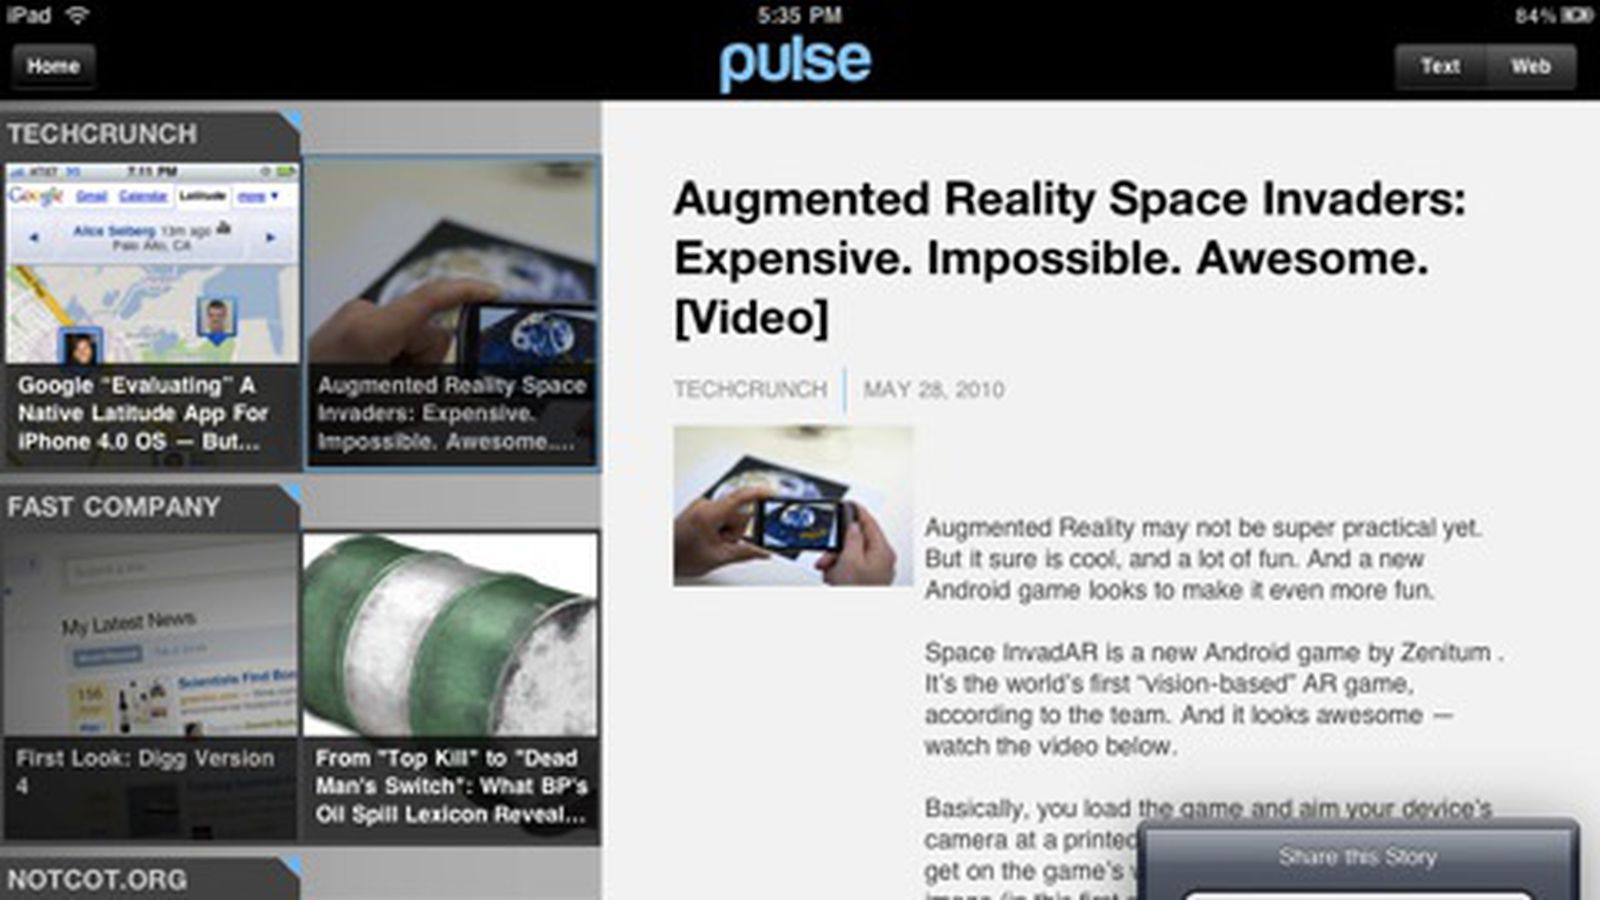 Pulse News Reader For Ipad Pulled From App Store After New York Times Complaint Updated X2 Macrumors